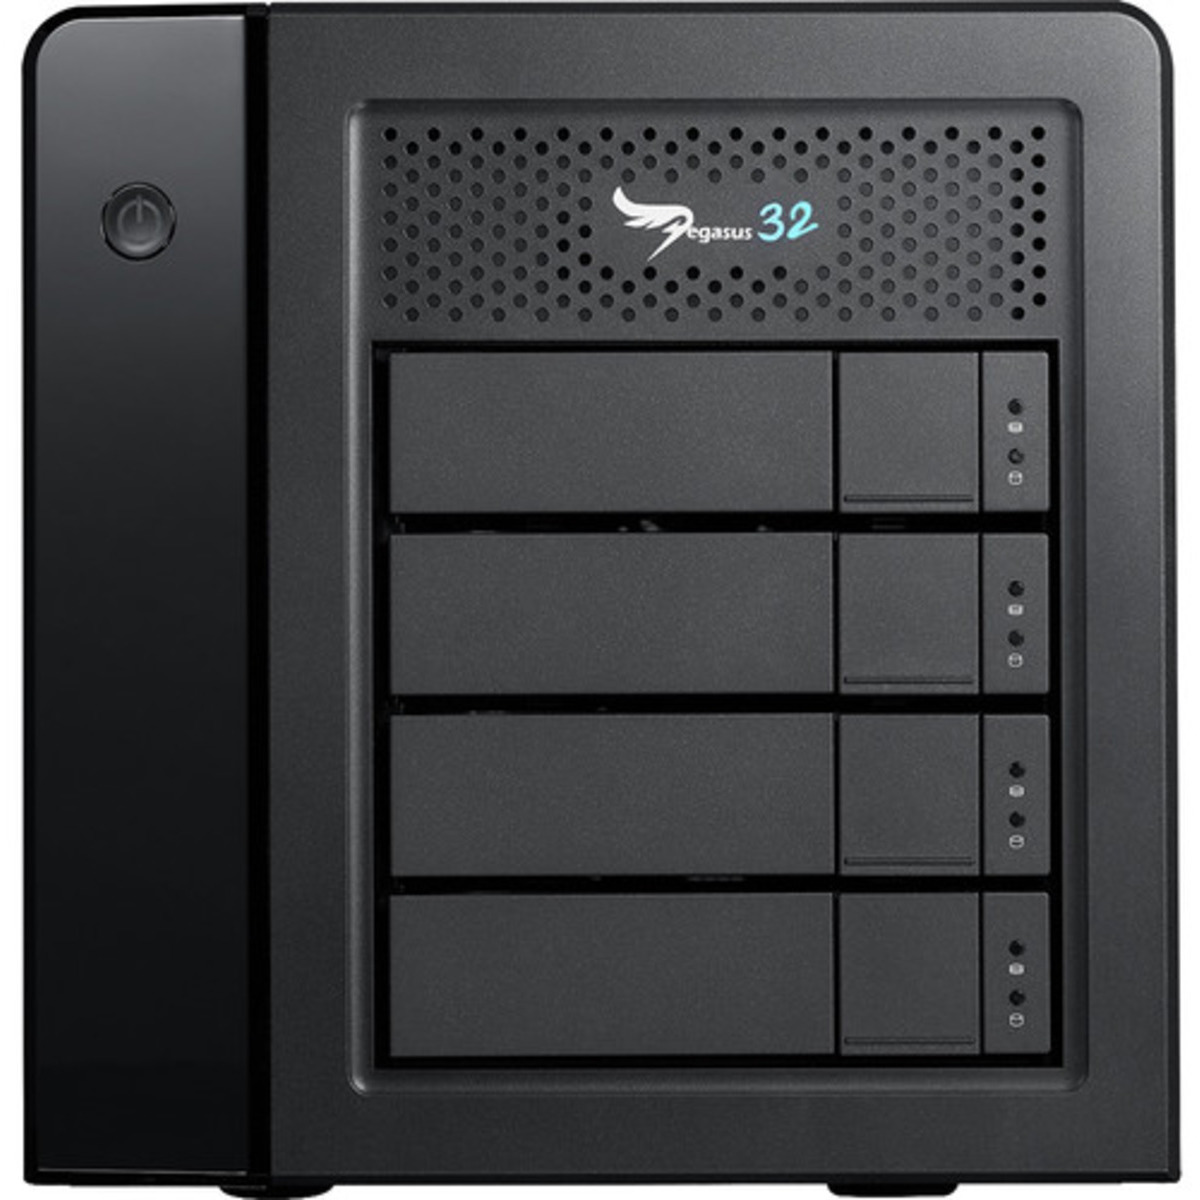 Promise Technology Pegasus32 R4 Thunderbolt 3 96tb 4-Bay Desktop Multimedia / Power User / Business DAS - Direct Attached Storage Device 4x24tb Seagate EXOS X24 ST24000NM002H 3.5 7200rpm SATA 6Gb/s HDD ENTERPRISE Class Drives Installed - Burn-In Tested Pegasus32 R4 Thunderbolt 3